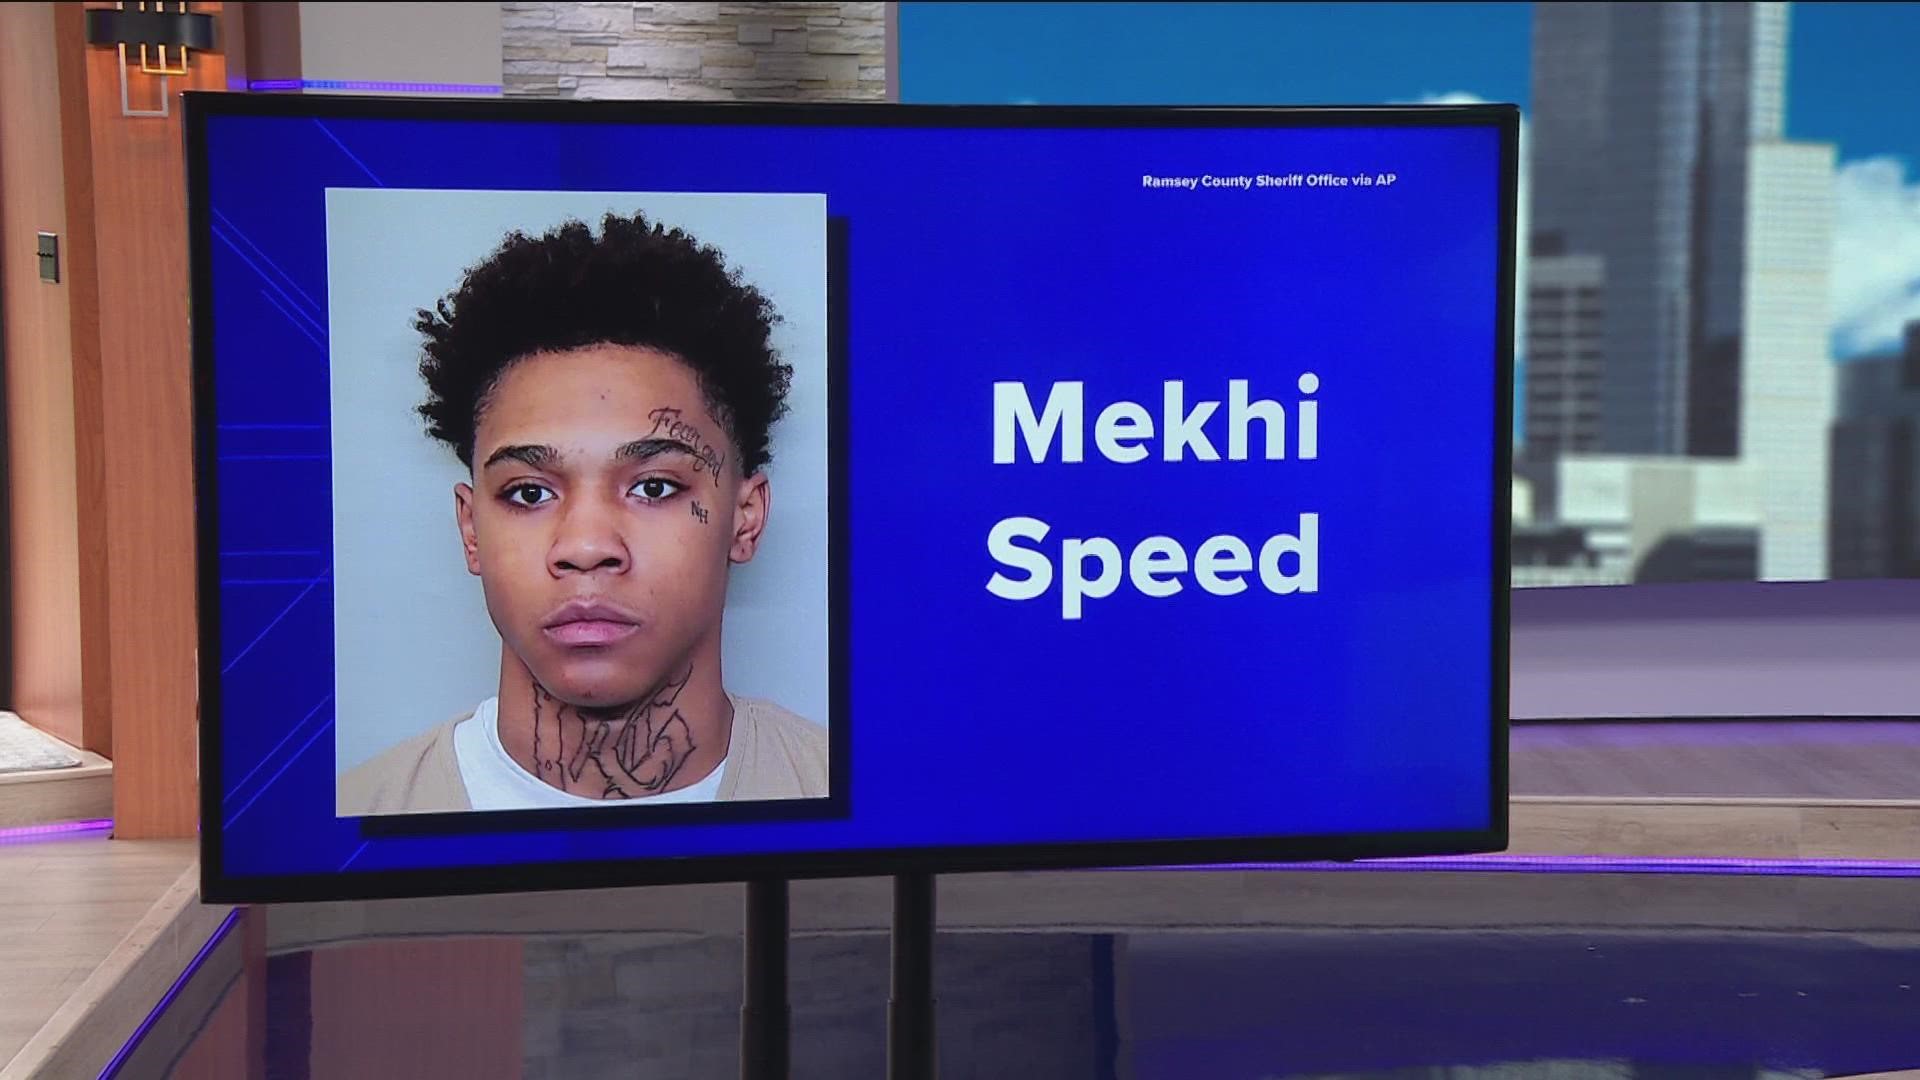 Mekhi Speed was sentenced to 195 months in prison on Monday during his sentencing hearing in Ramsey County.